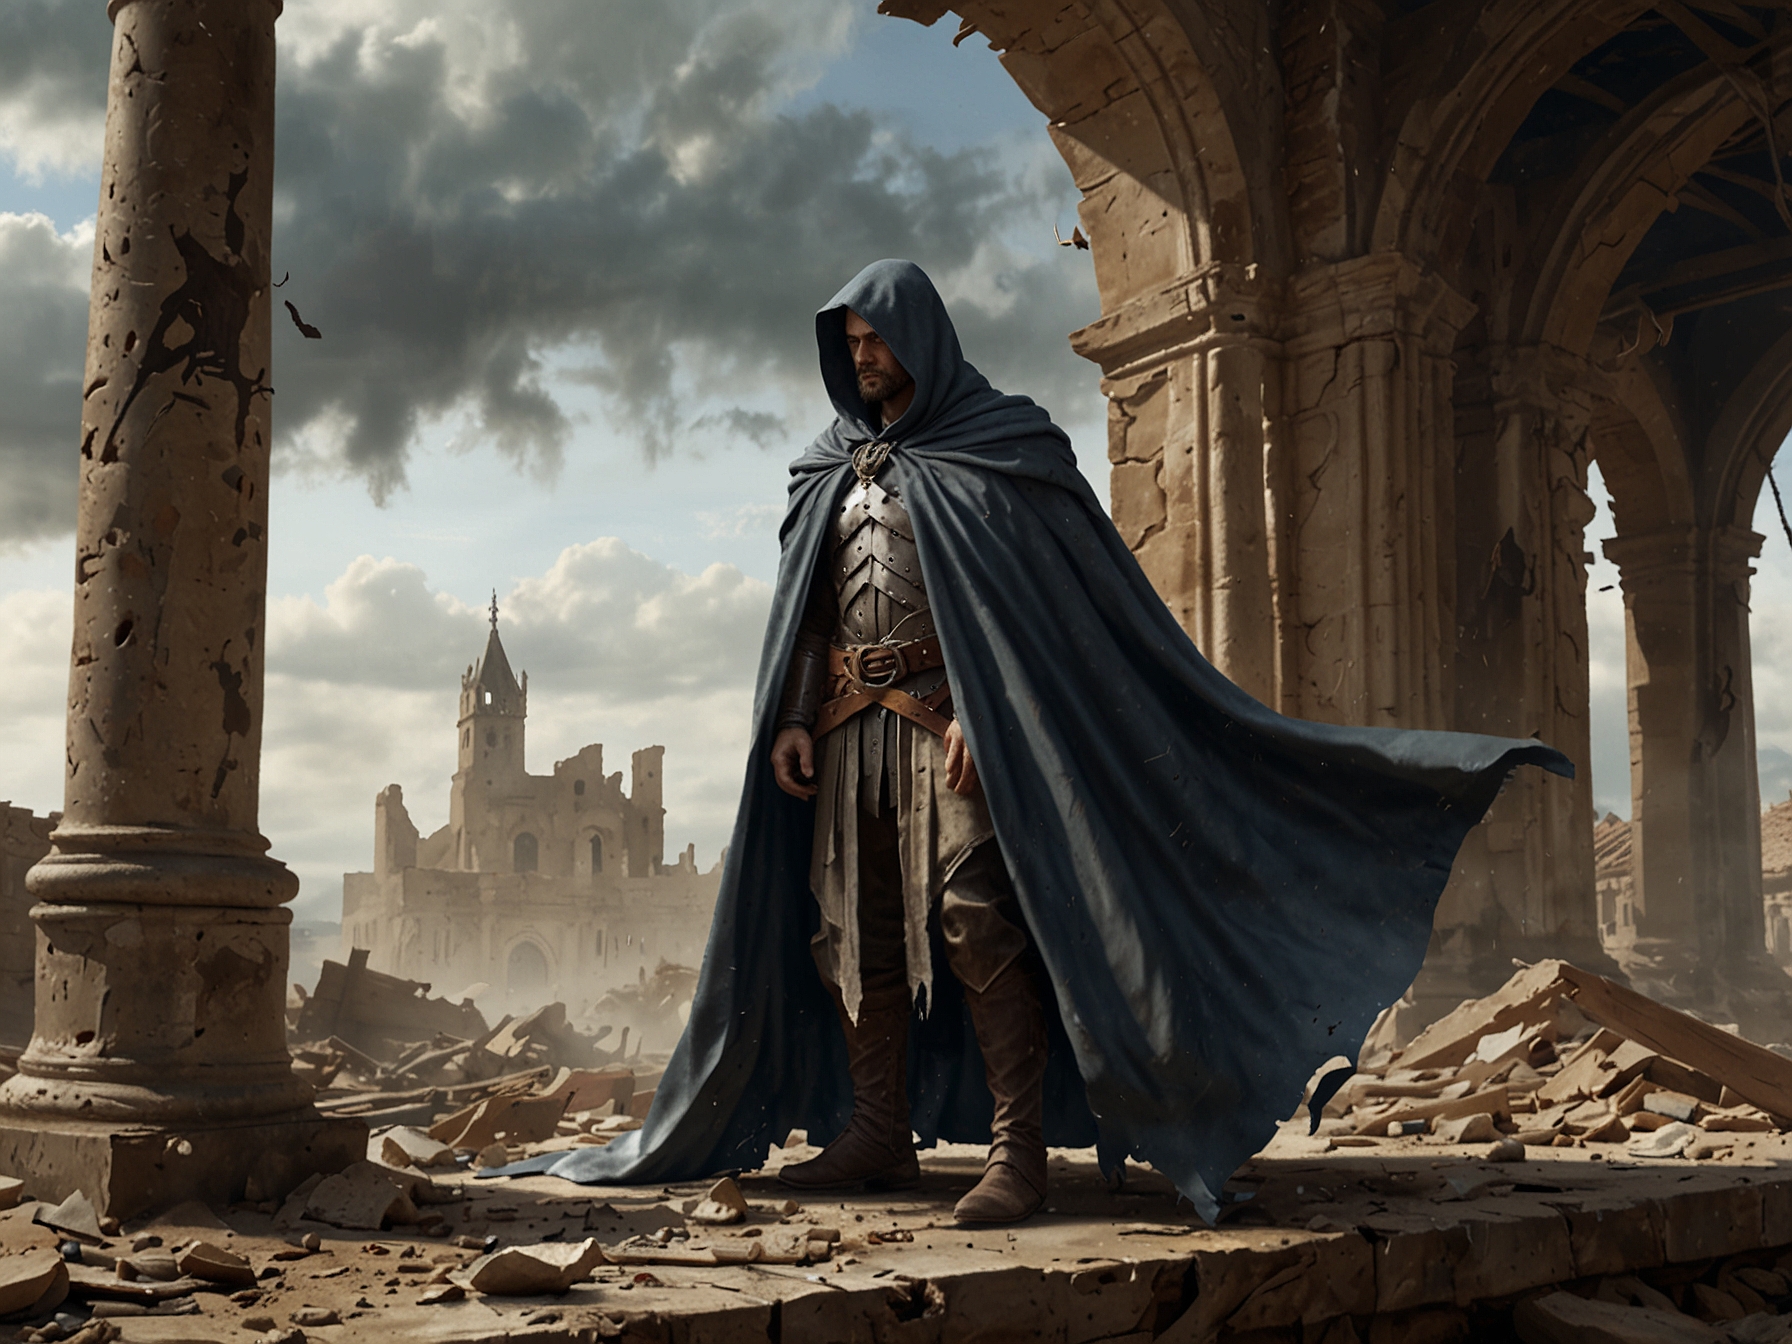 A character draped in a detailed, flowing cape stands in a ruin with tattered banners flapping in the wind, highlighting the impact of dynamic weather on cloth.